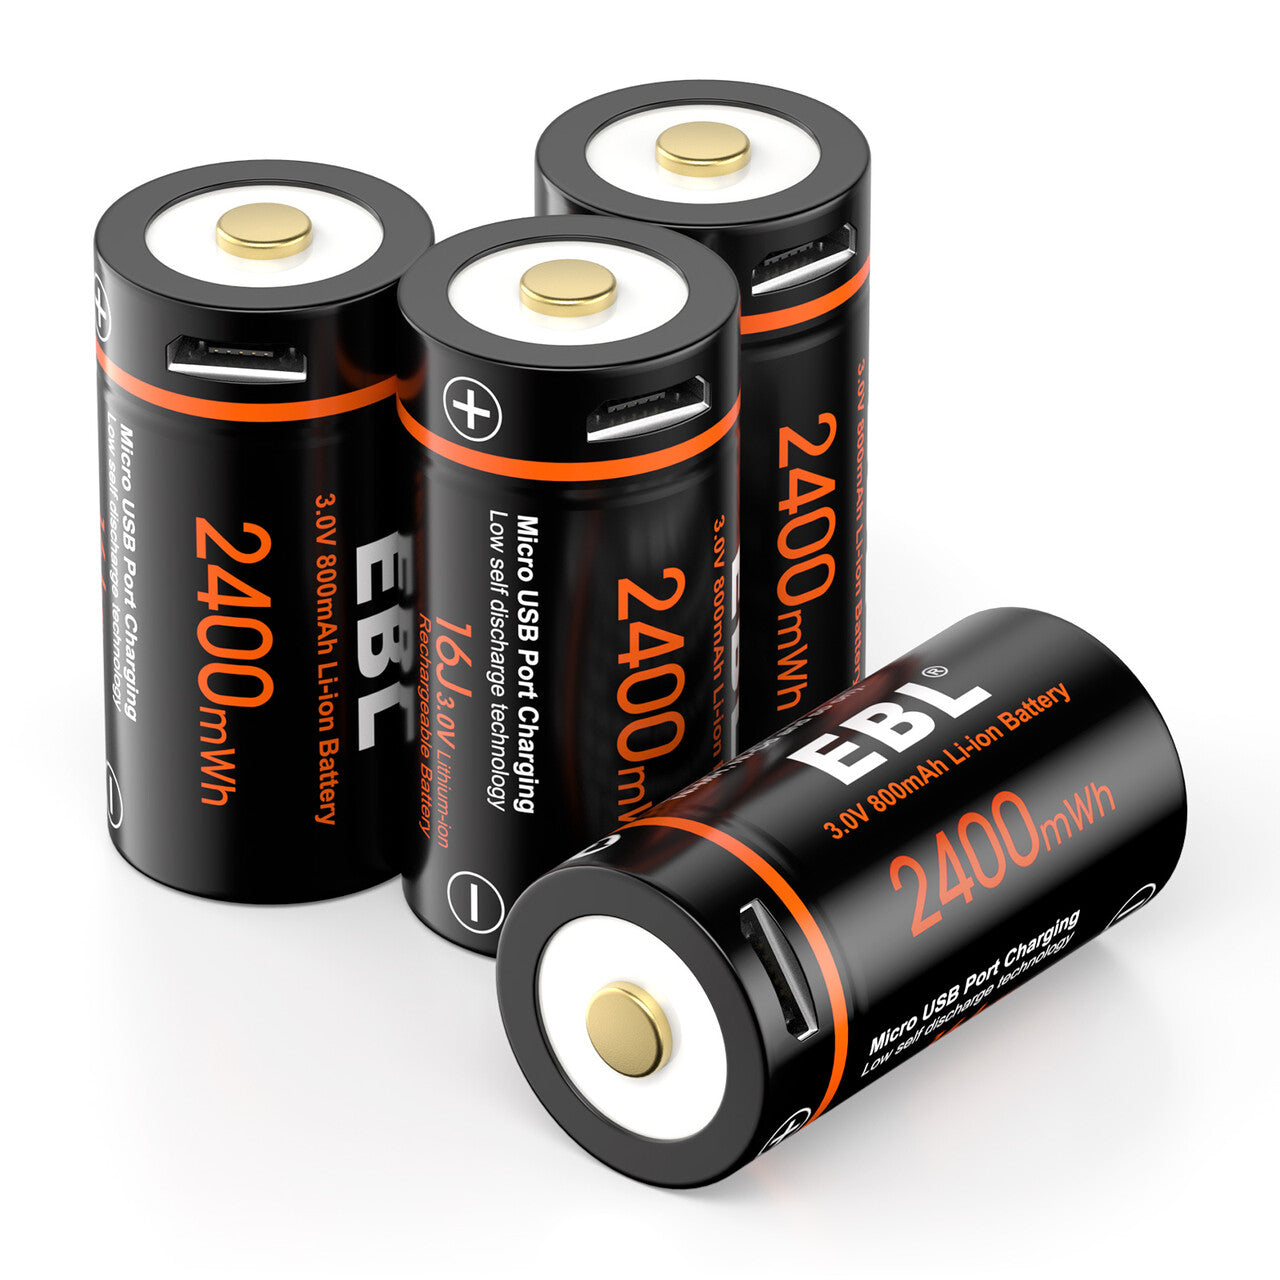 Philips CR123A Lithium battery